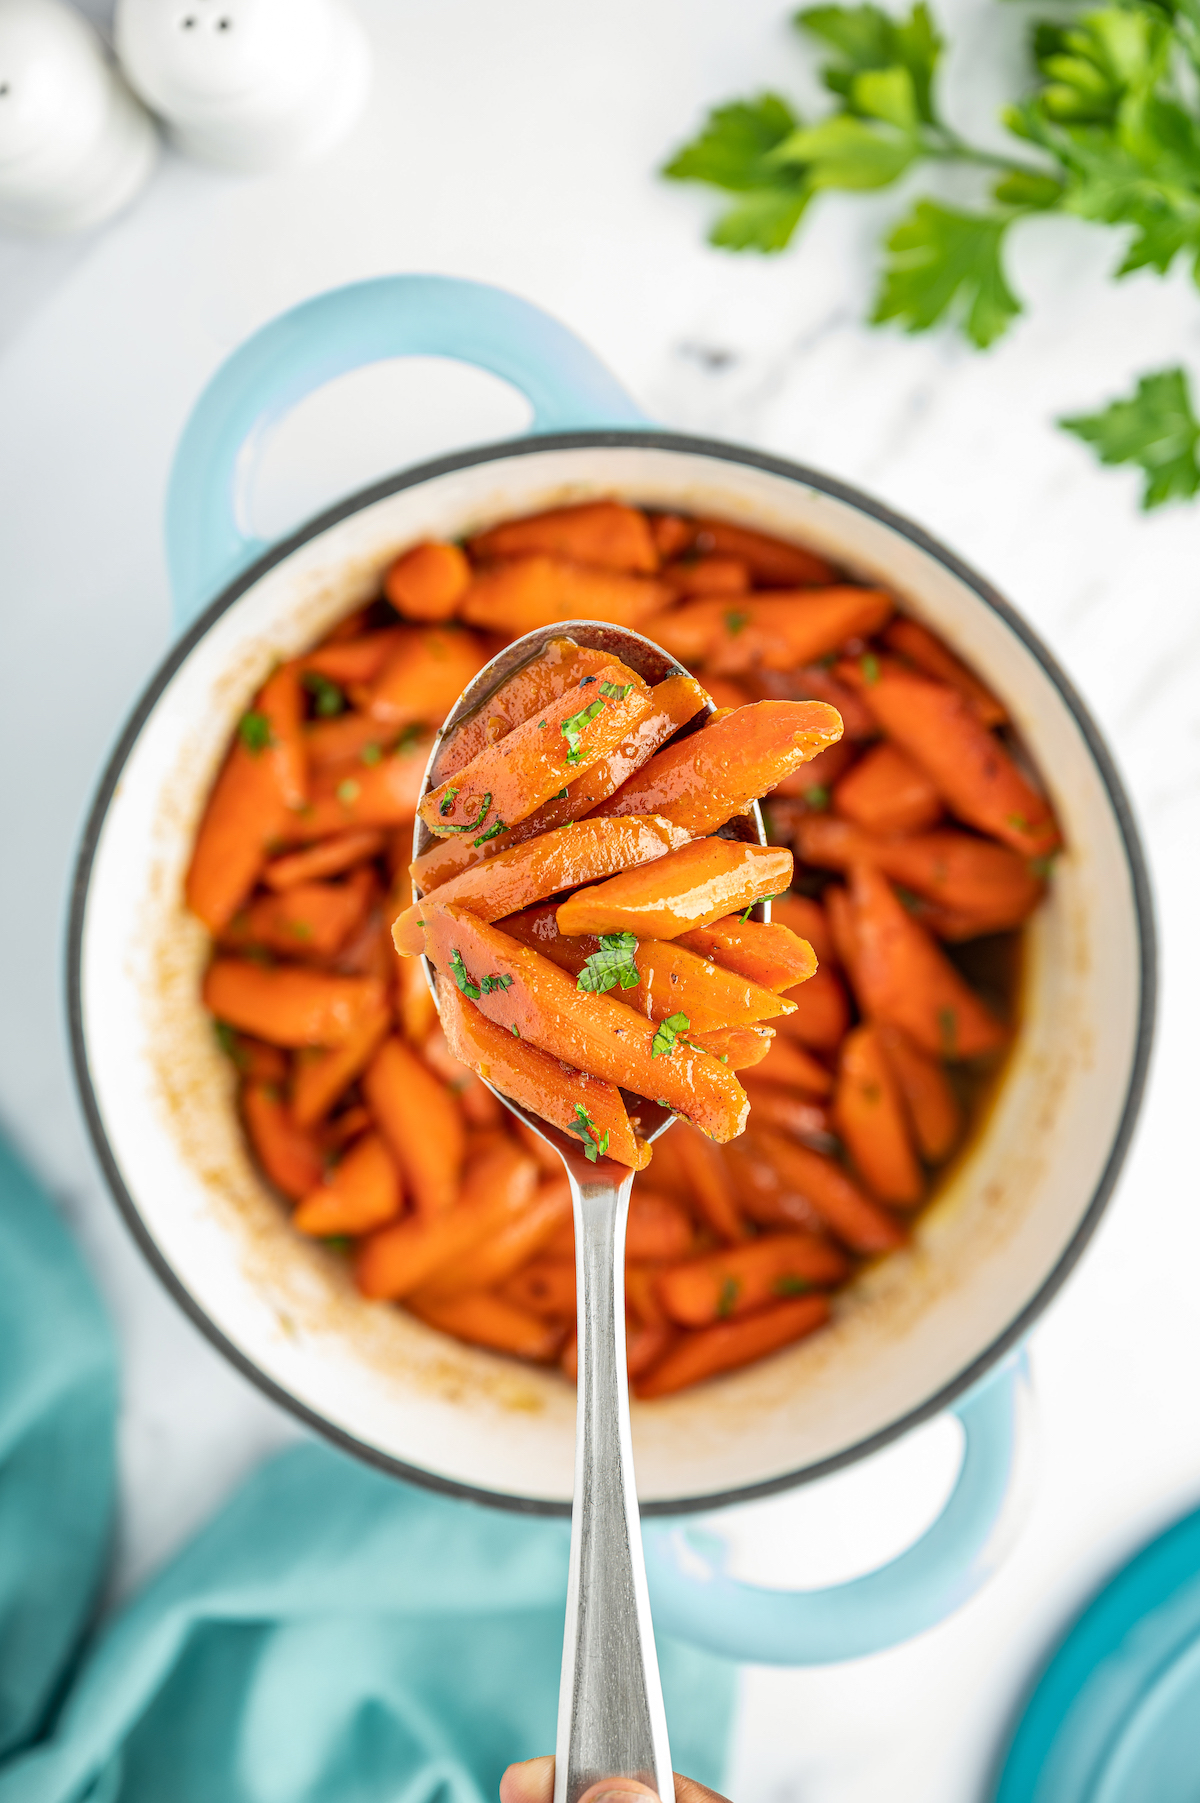 A pot of carrots in sauce, garnished with herbs. Some of the carrots are being lifted toward the camera on a spoon.